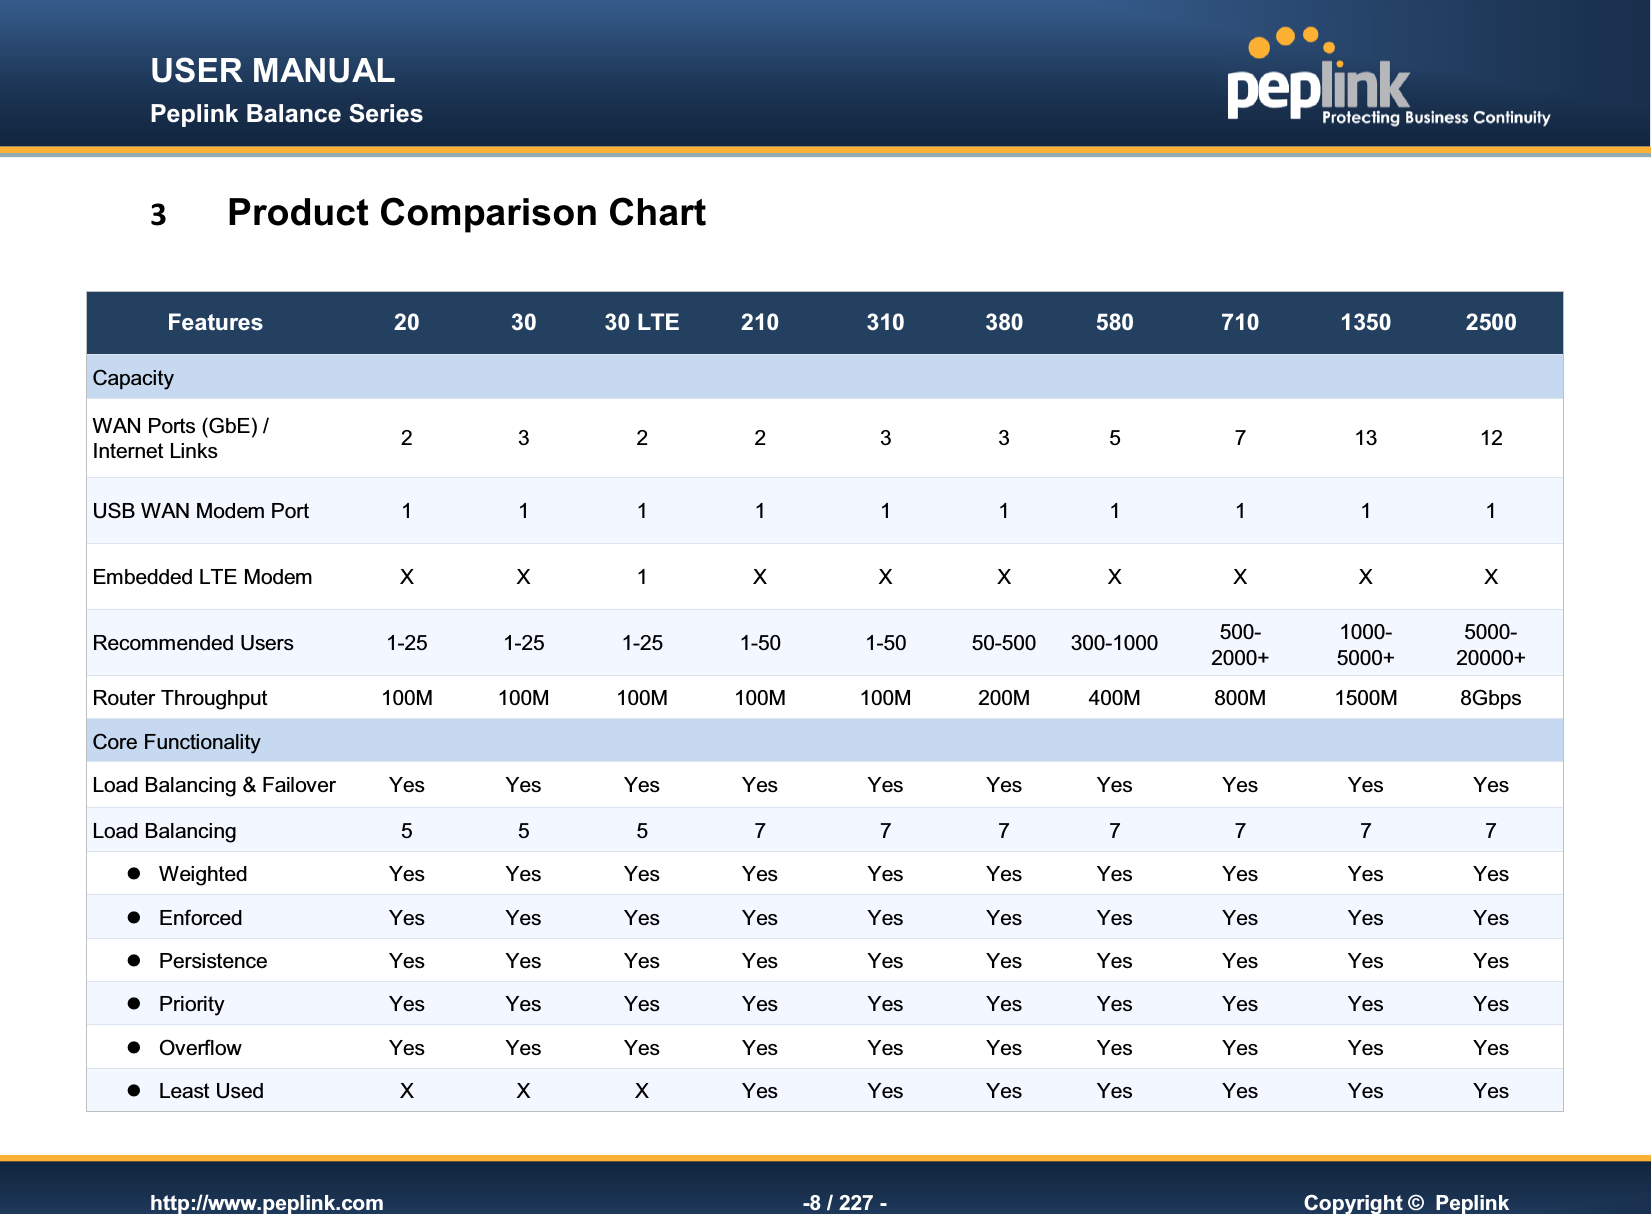 USER MANUAL Peplink Balance Series   http://www.peplink.com -8 / 227 -  Copyright ©  Peplink 3 Product Comparison Chart  Features  20 30 30 LTE 210 310 380 580 710 1350 2500 Capacity           WAN Ports (GbE) / Internet Links 2  3  2  2  3  3  5  7  13  12 USB WAN Modem Port 1  1  1  1  1  1  1  1  1 1 Embedded LTE Modem X  X  1  X  X  X X  X X X Recommended Users  1-25 1-25 1-25 1-501-50 50-500 300-1000 500- 2000+ 1000-5000+ 5000- 20000+ Router Throughput 100M 100M 100M 100M 100M 200M 400M 800M 1500M 8Gbps Core Functionality           Load Balancing &amp; Failover Yes Yes Yes Yes Yes Yes Yes Yes Yes Yes Load Balancing Algorithms 5 5 5 7 7 7 7 7 7 7 l  Weighted Yes Yes Yes Yes Yes Yes Yes Yes Yes Yes l  Enforced Yes Yes Yes Yes Yes Yes Yes Yes Yes Yes l  Persistence Yes Yes Yes Yes Yes Yes Yes Yes Yes Yes l  Priority Yes Yes Yes Yes Yes Yes Yes Yes Yes Yes l  Overflow Yes Yes Yes Yes Yes Yes Yes Yes Yes Yes l  Least Used X X X Yes Yes Yes Yes Yes Yes Yes 